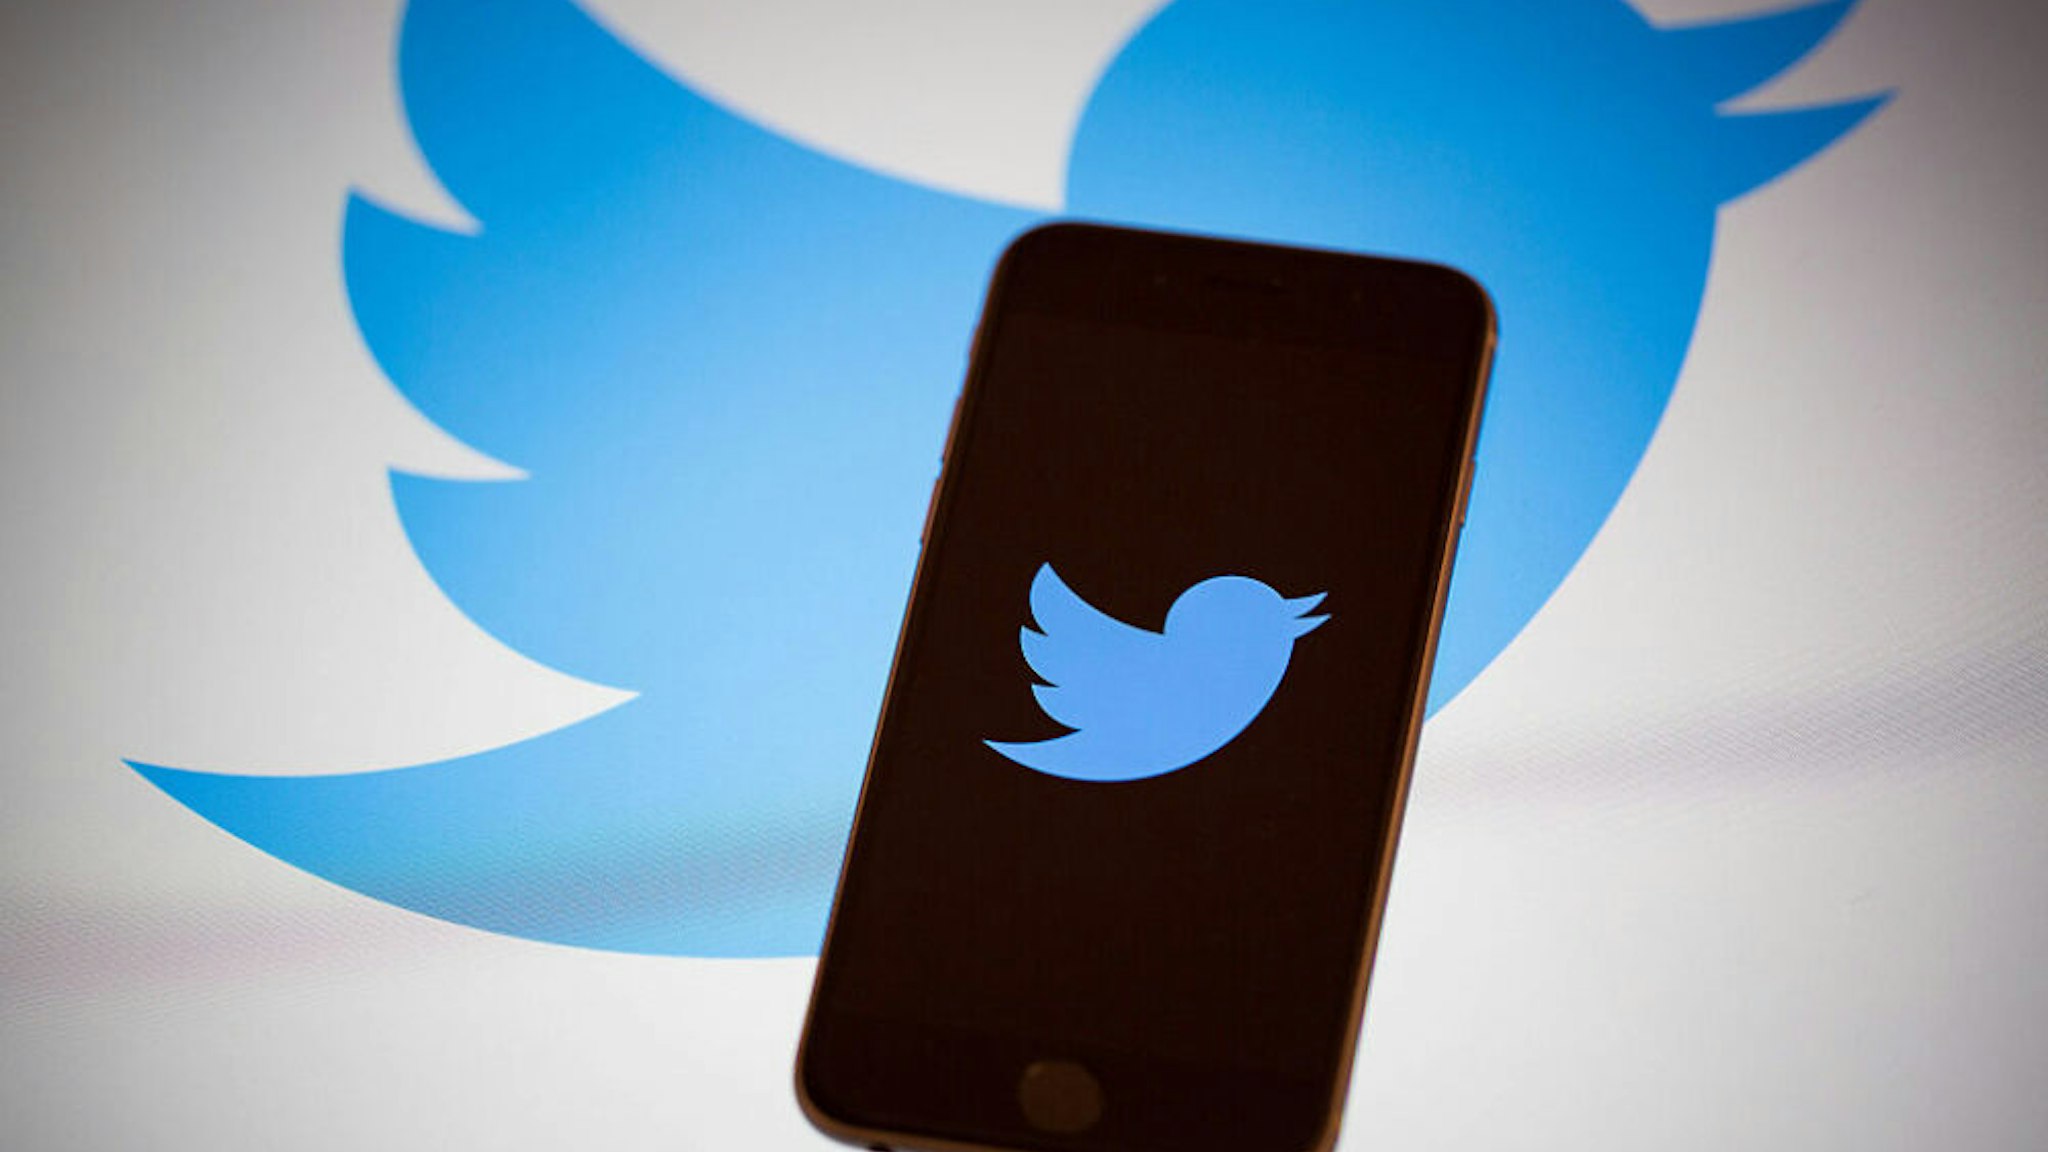 The Twitter Inc. logo is displayed on the screen of an Apple Inc. iPhone 6s in this arranged photograph taken in New York, U.S., on Tuesday, Feb. 9, 2016. Twitter Inc. is changing its timeline to display popular tweets first, instead of the latest posts, a long-anticipated step thats likely to anger its most passionate users. Twitter is scheduled to report quarterly earnings results following the close of U.S. financial markets on February 10.